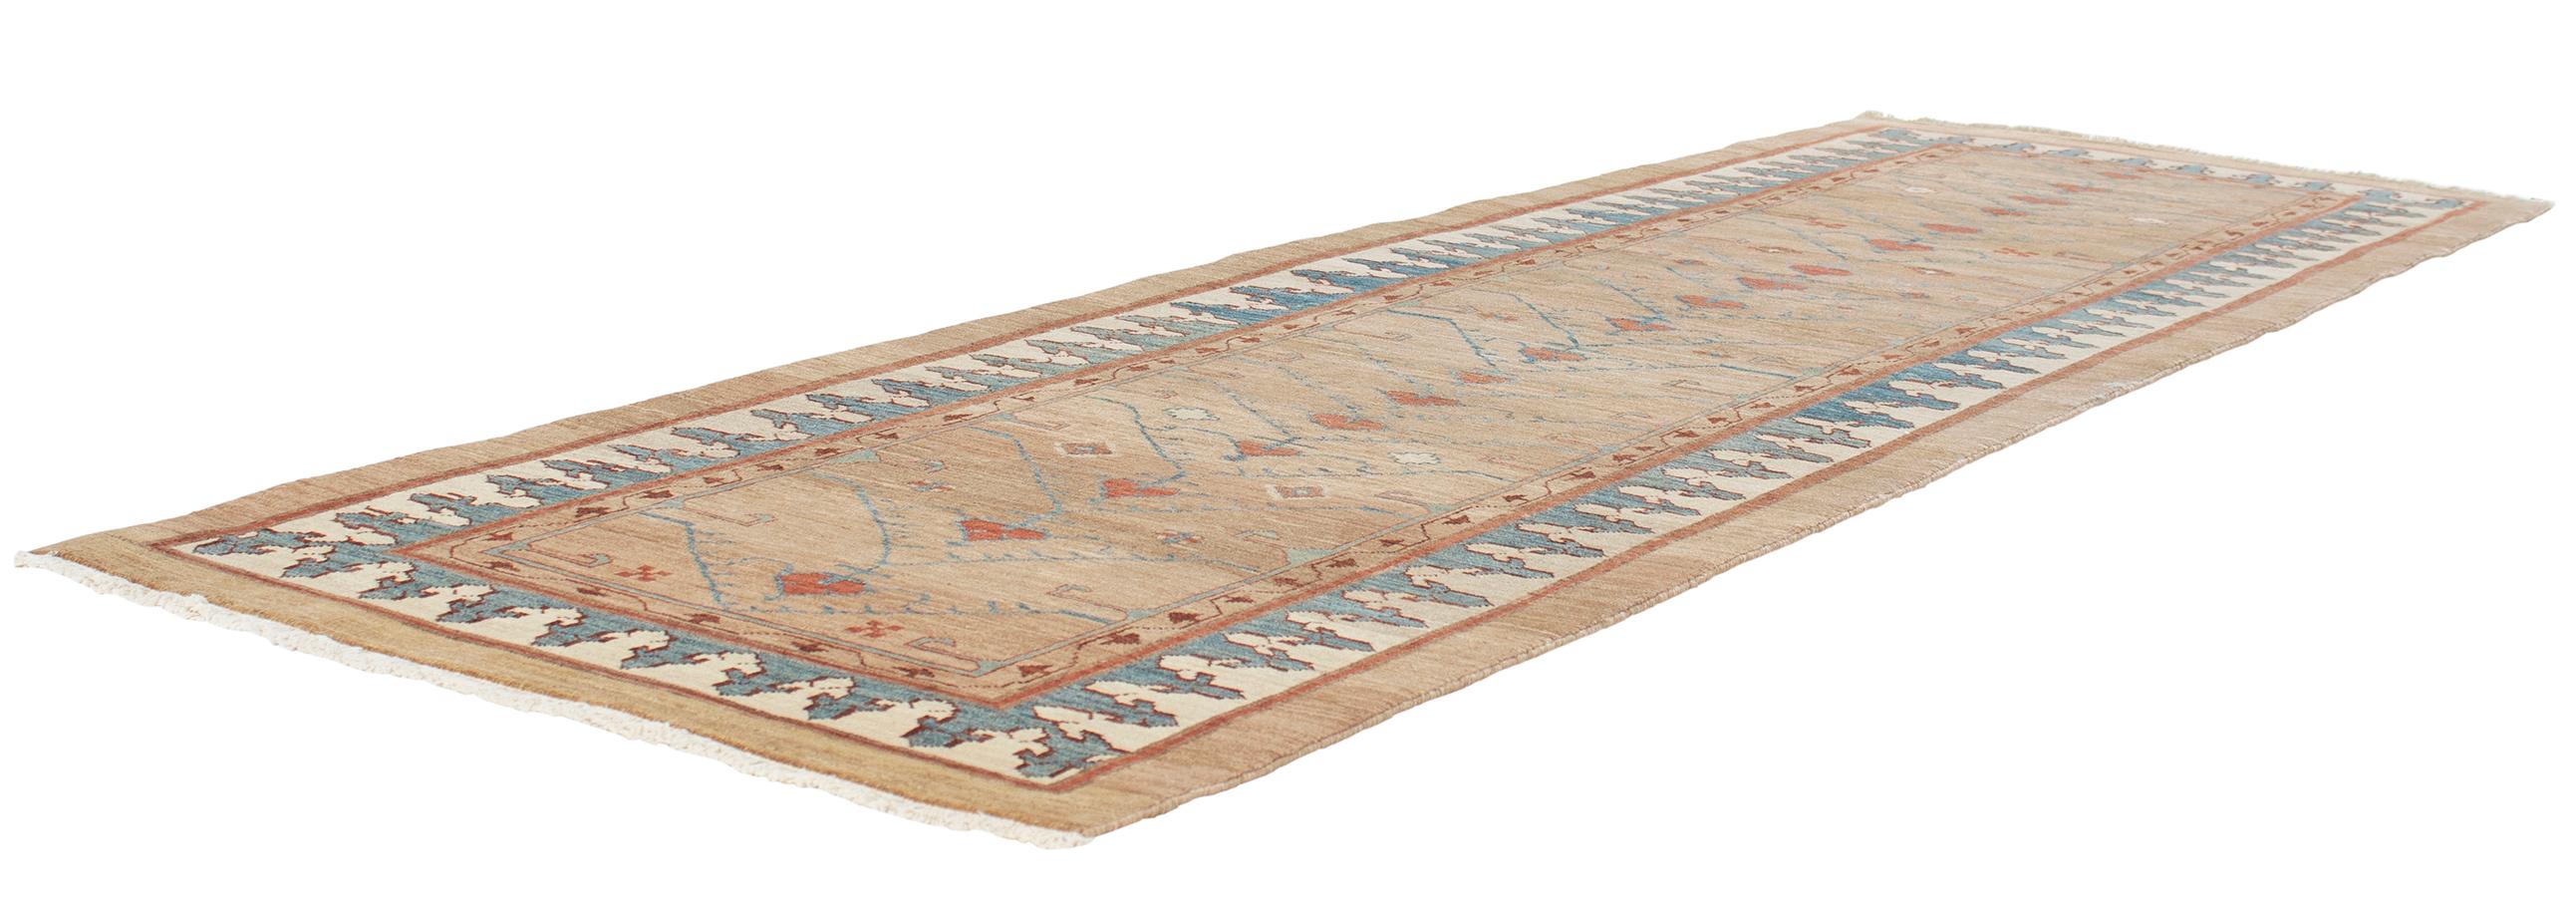 This rug resembles the rare and collectible antique Bakshaish rugs that were produced in the 19th century and earlier. Due to their limited availability, NASIRI revived the ancient dyeing and weaving techniques that have dissolved over the years to